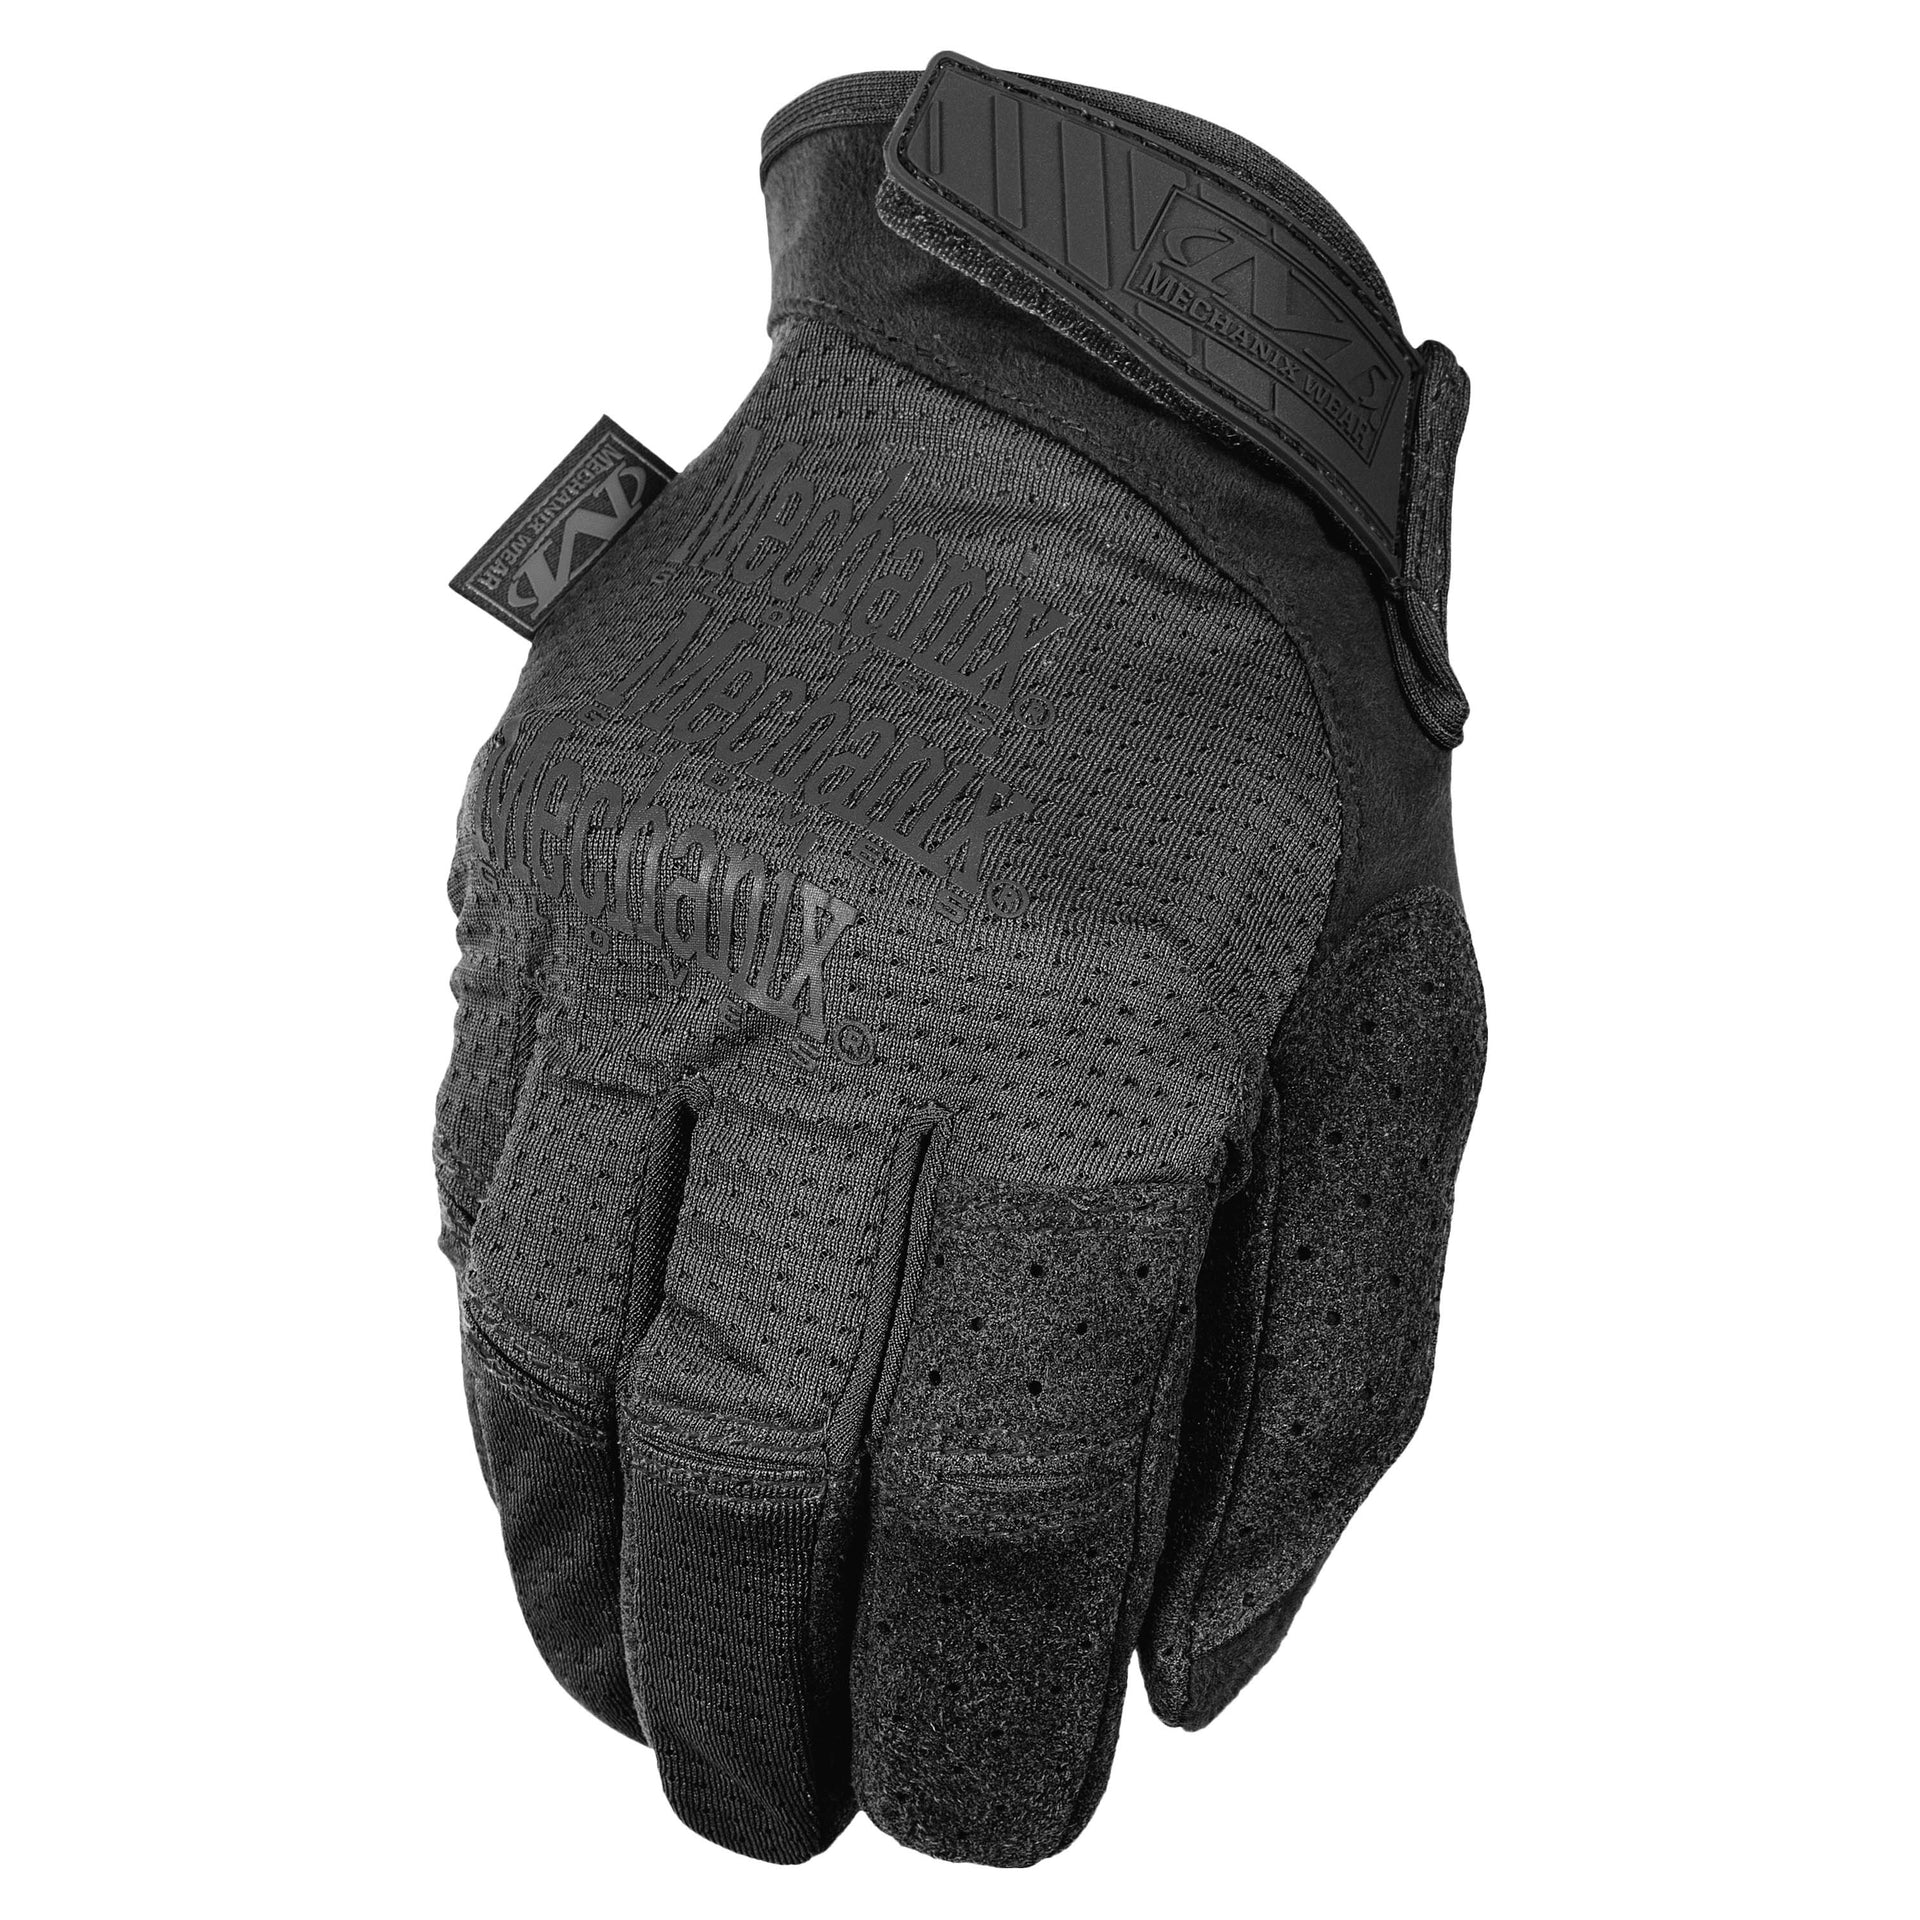 Gloves Specialty Vent covert